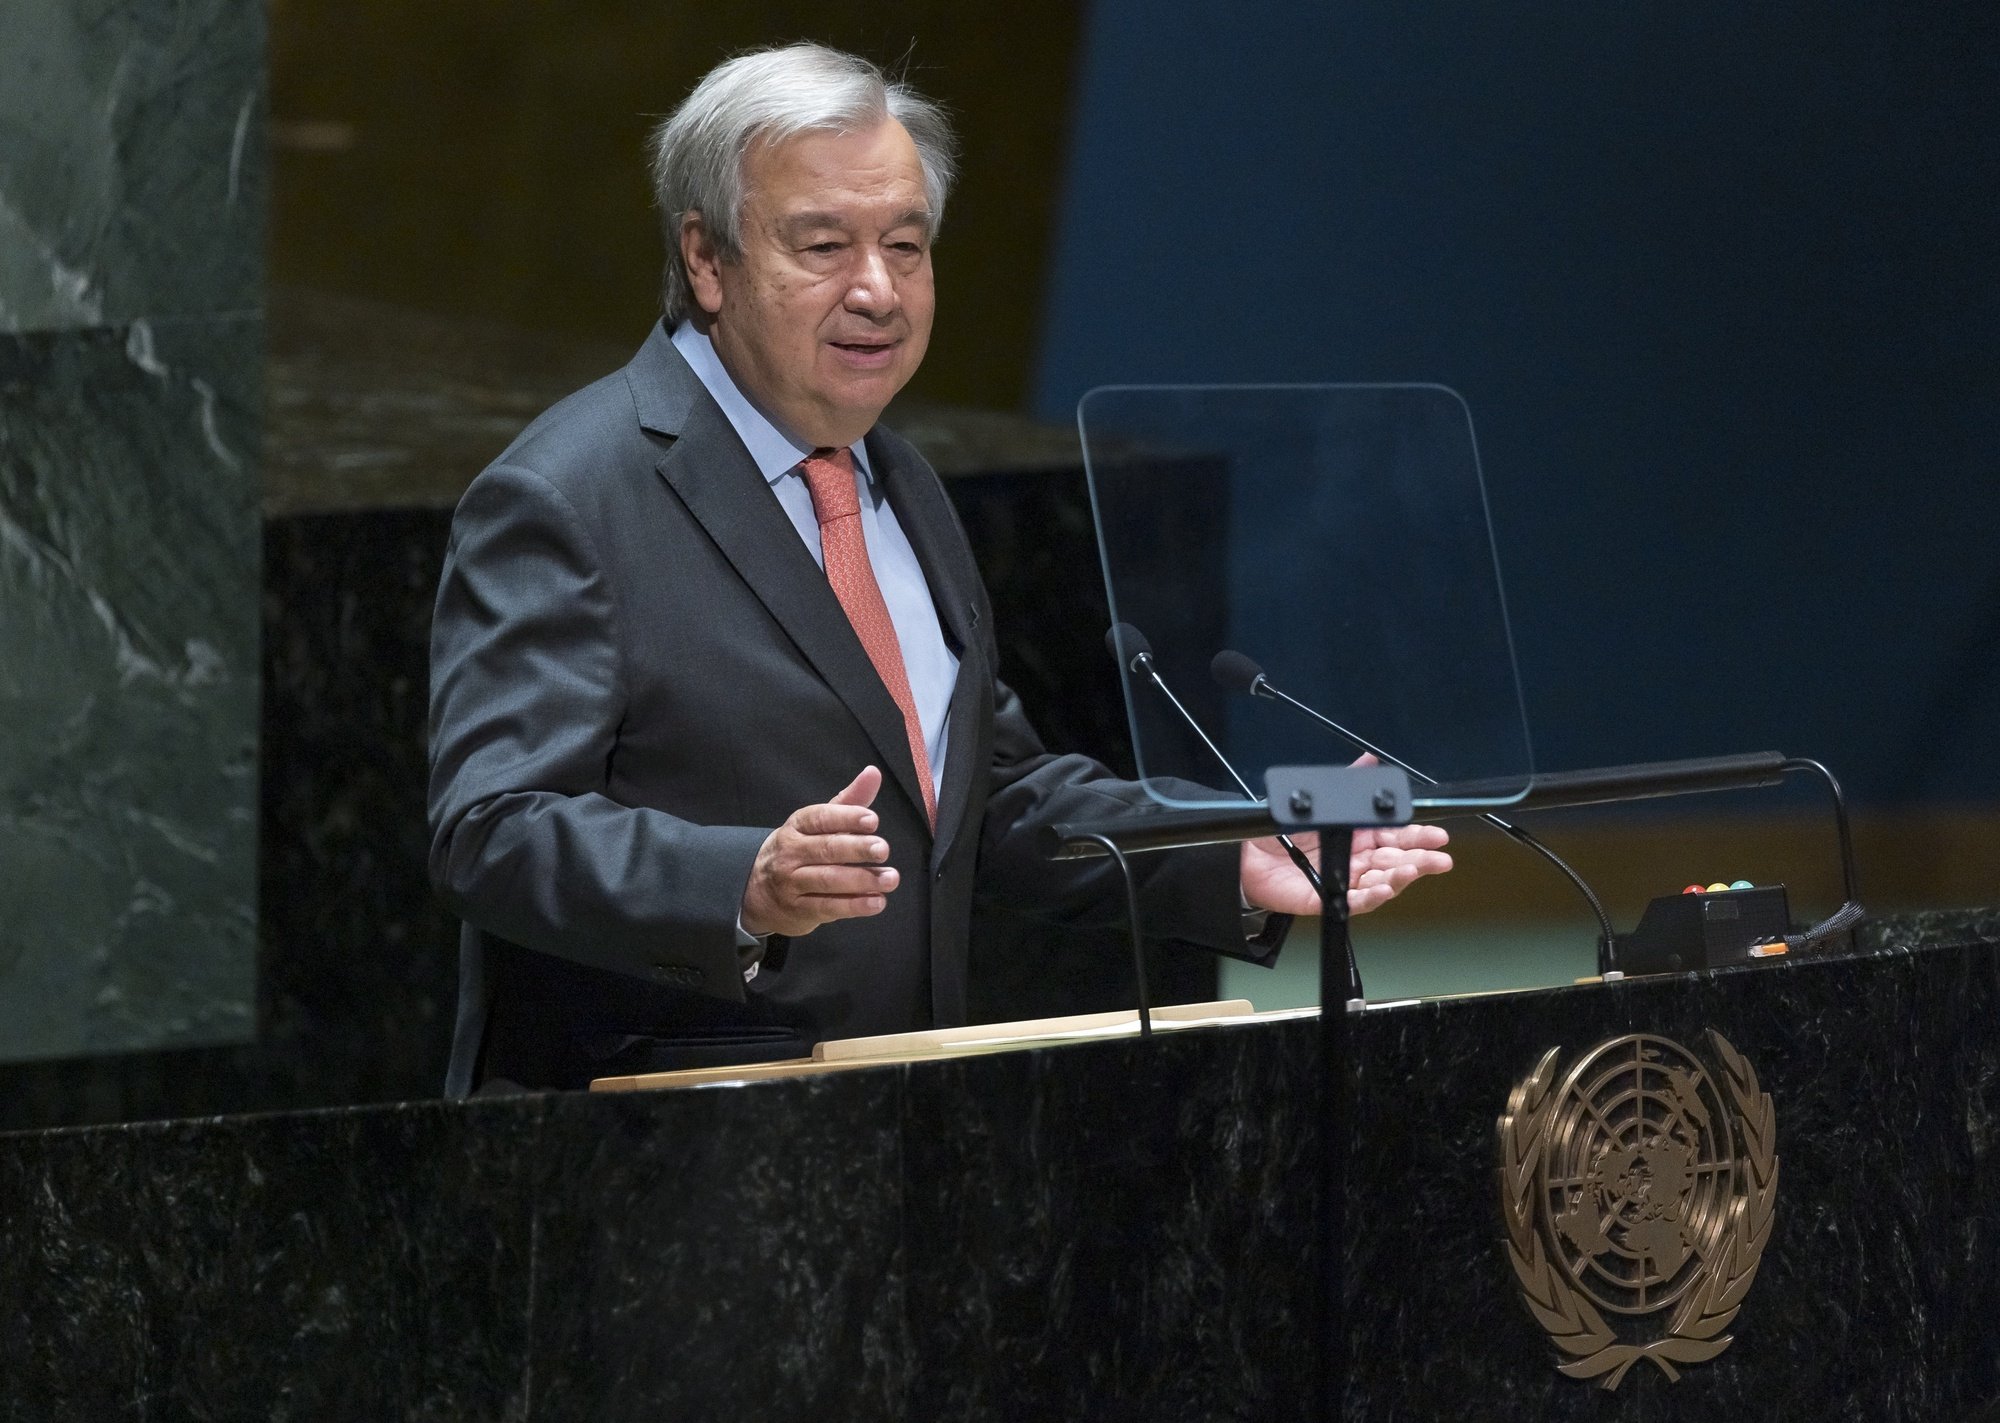 epa10101610 United Nations Secretary-General Antonio Guterres addresses the Tenth Review Conference of the Parties to the Treaty on the Non-Proliferation of Nuclear Weapons (NPT) at United Nations headquarters in New York, New York, USA, 01 August 2022. The NPT is an international treaty intended to prevent the spread of nuclear weapons and promote the safety of nuclear energy, with the long term objective of achieving complete disarmament.  EPA/JUSTIN LANE